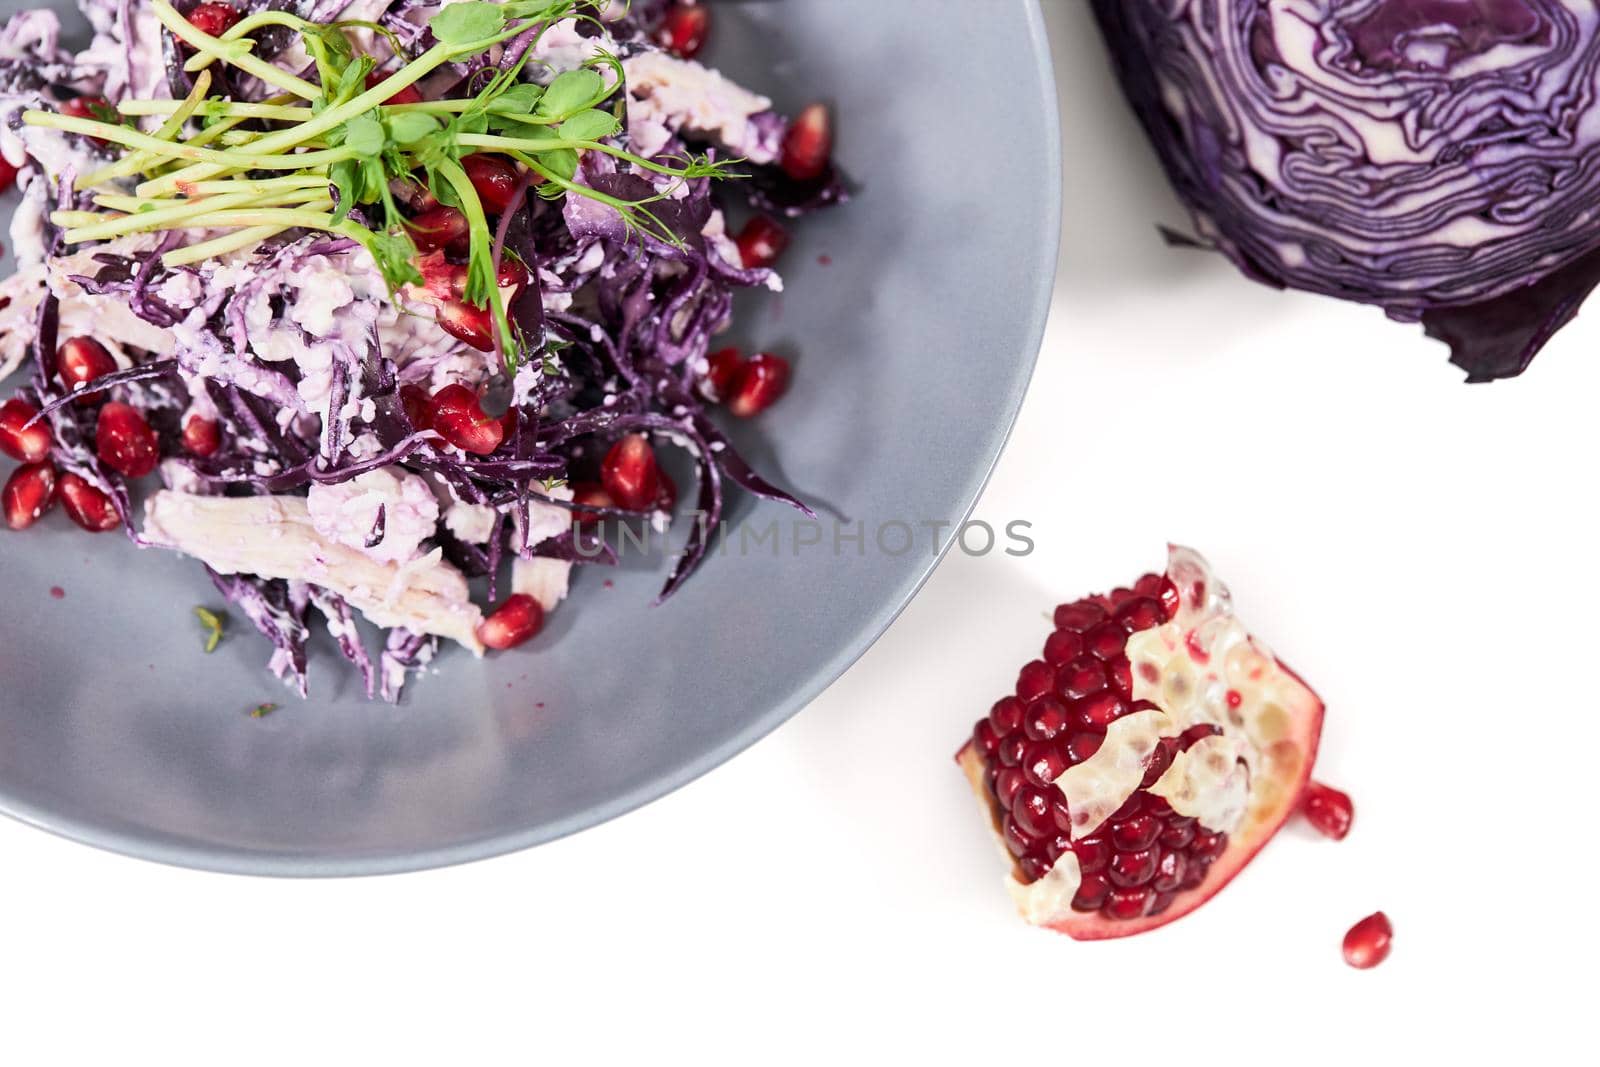  Modern and tasty salad with fresh purple cabbage at home. by SerhiiBobyk